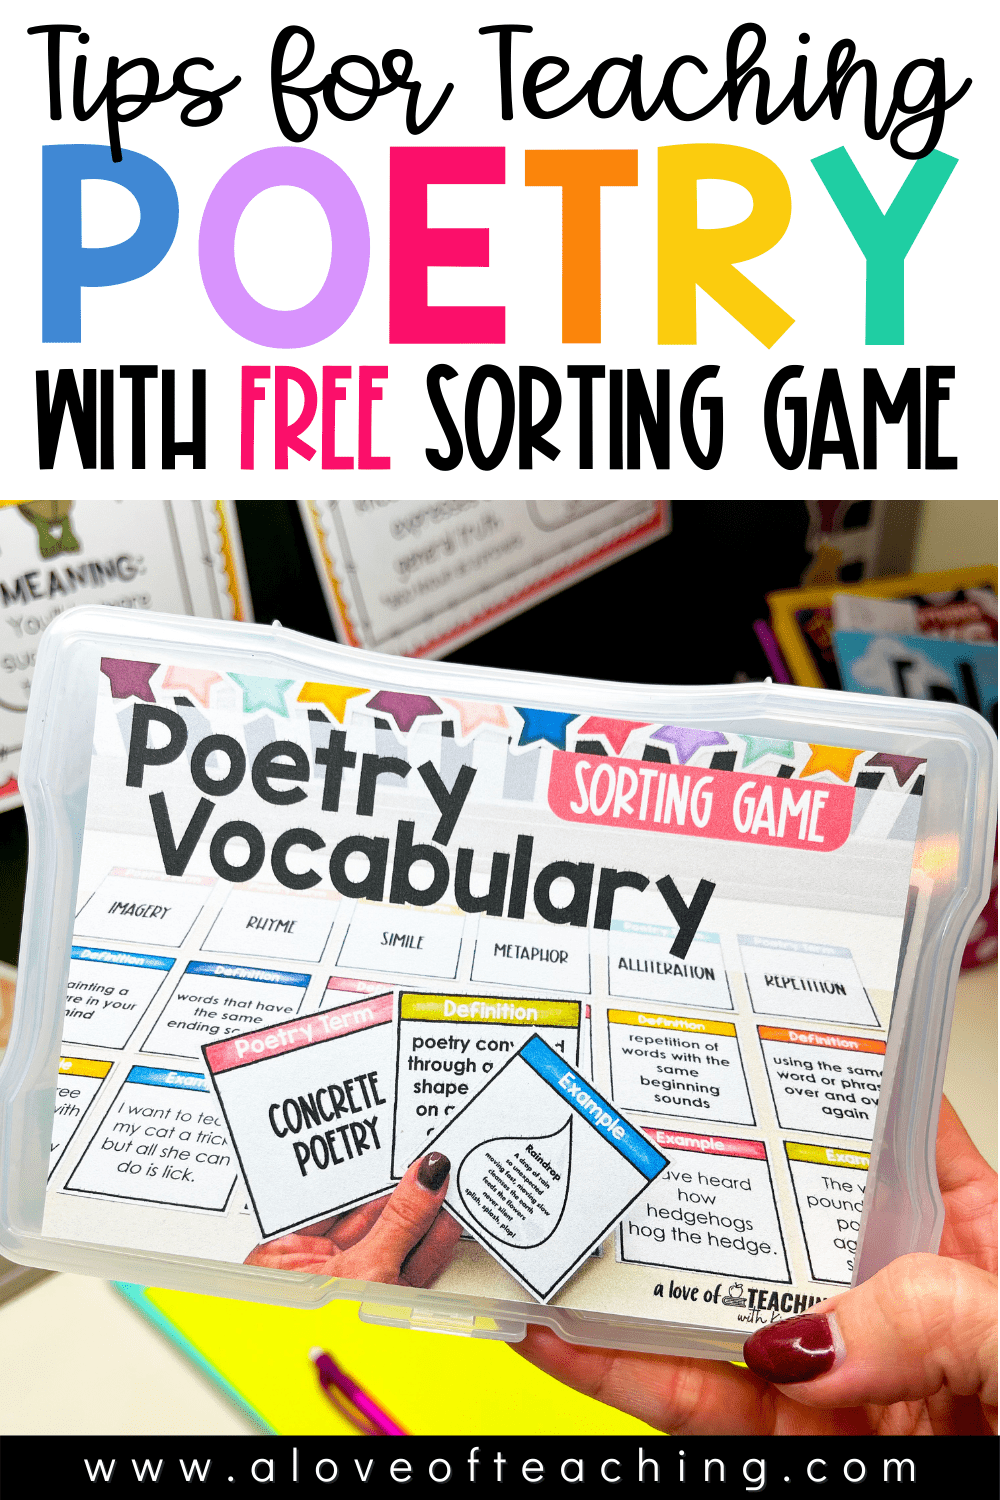 Tips for Teaching Poetry with Free Poetry Vocabulary Game